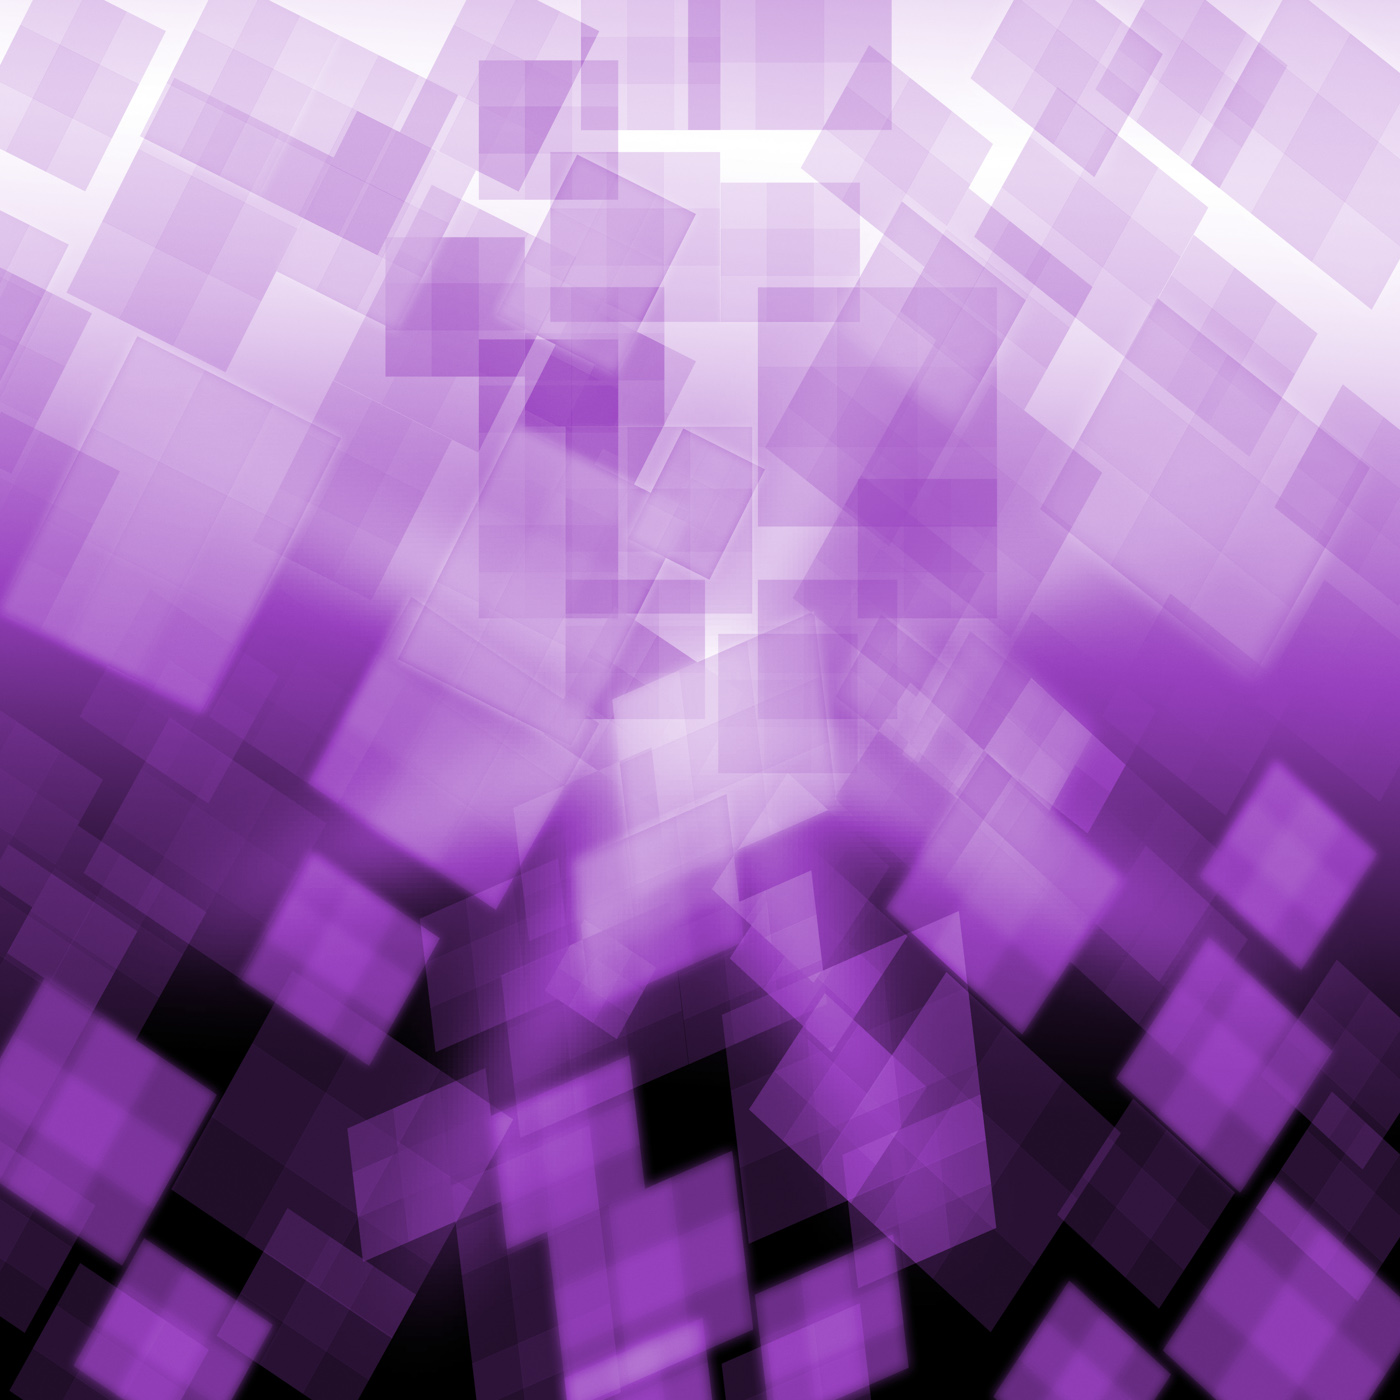 Purple cubes background means repetitive pattern or wallpaper photo